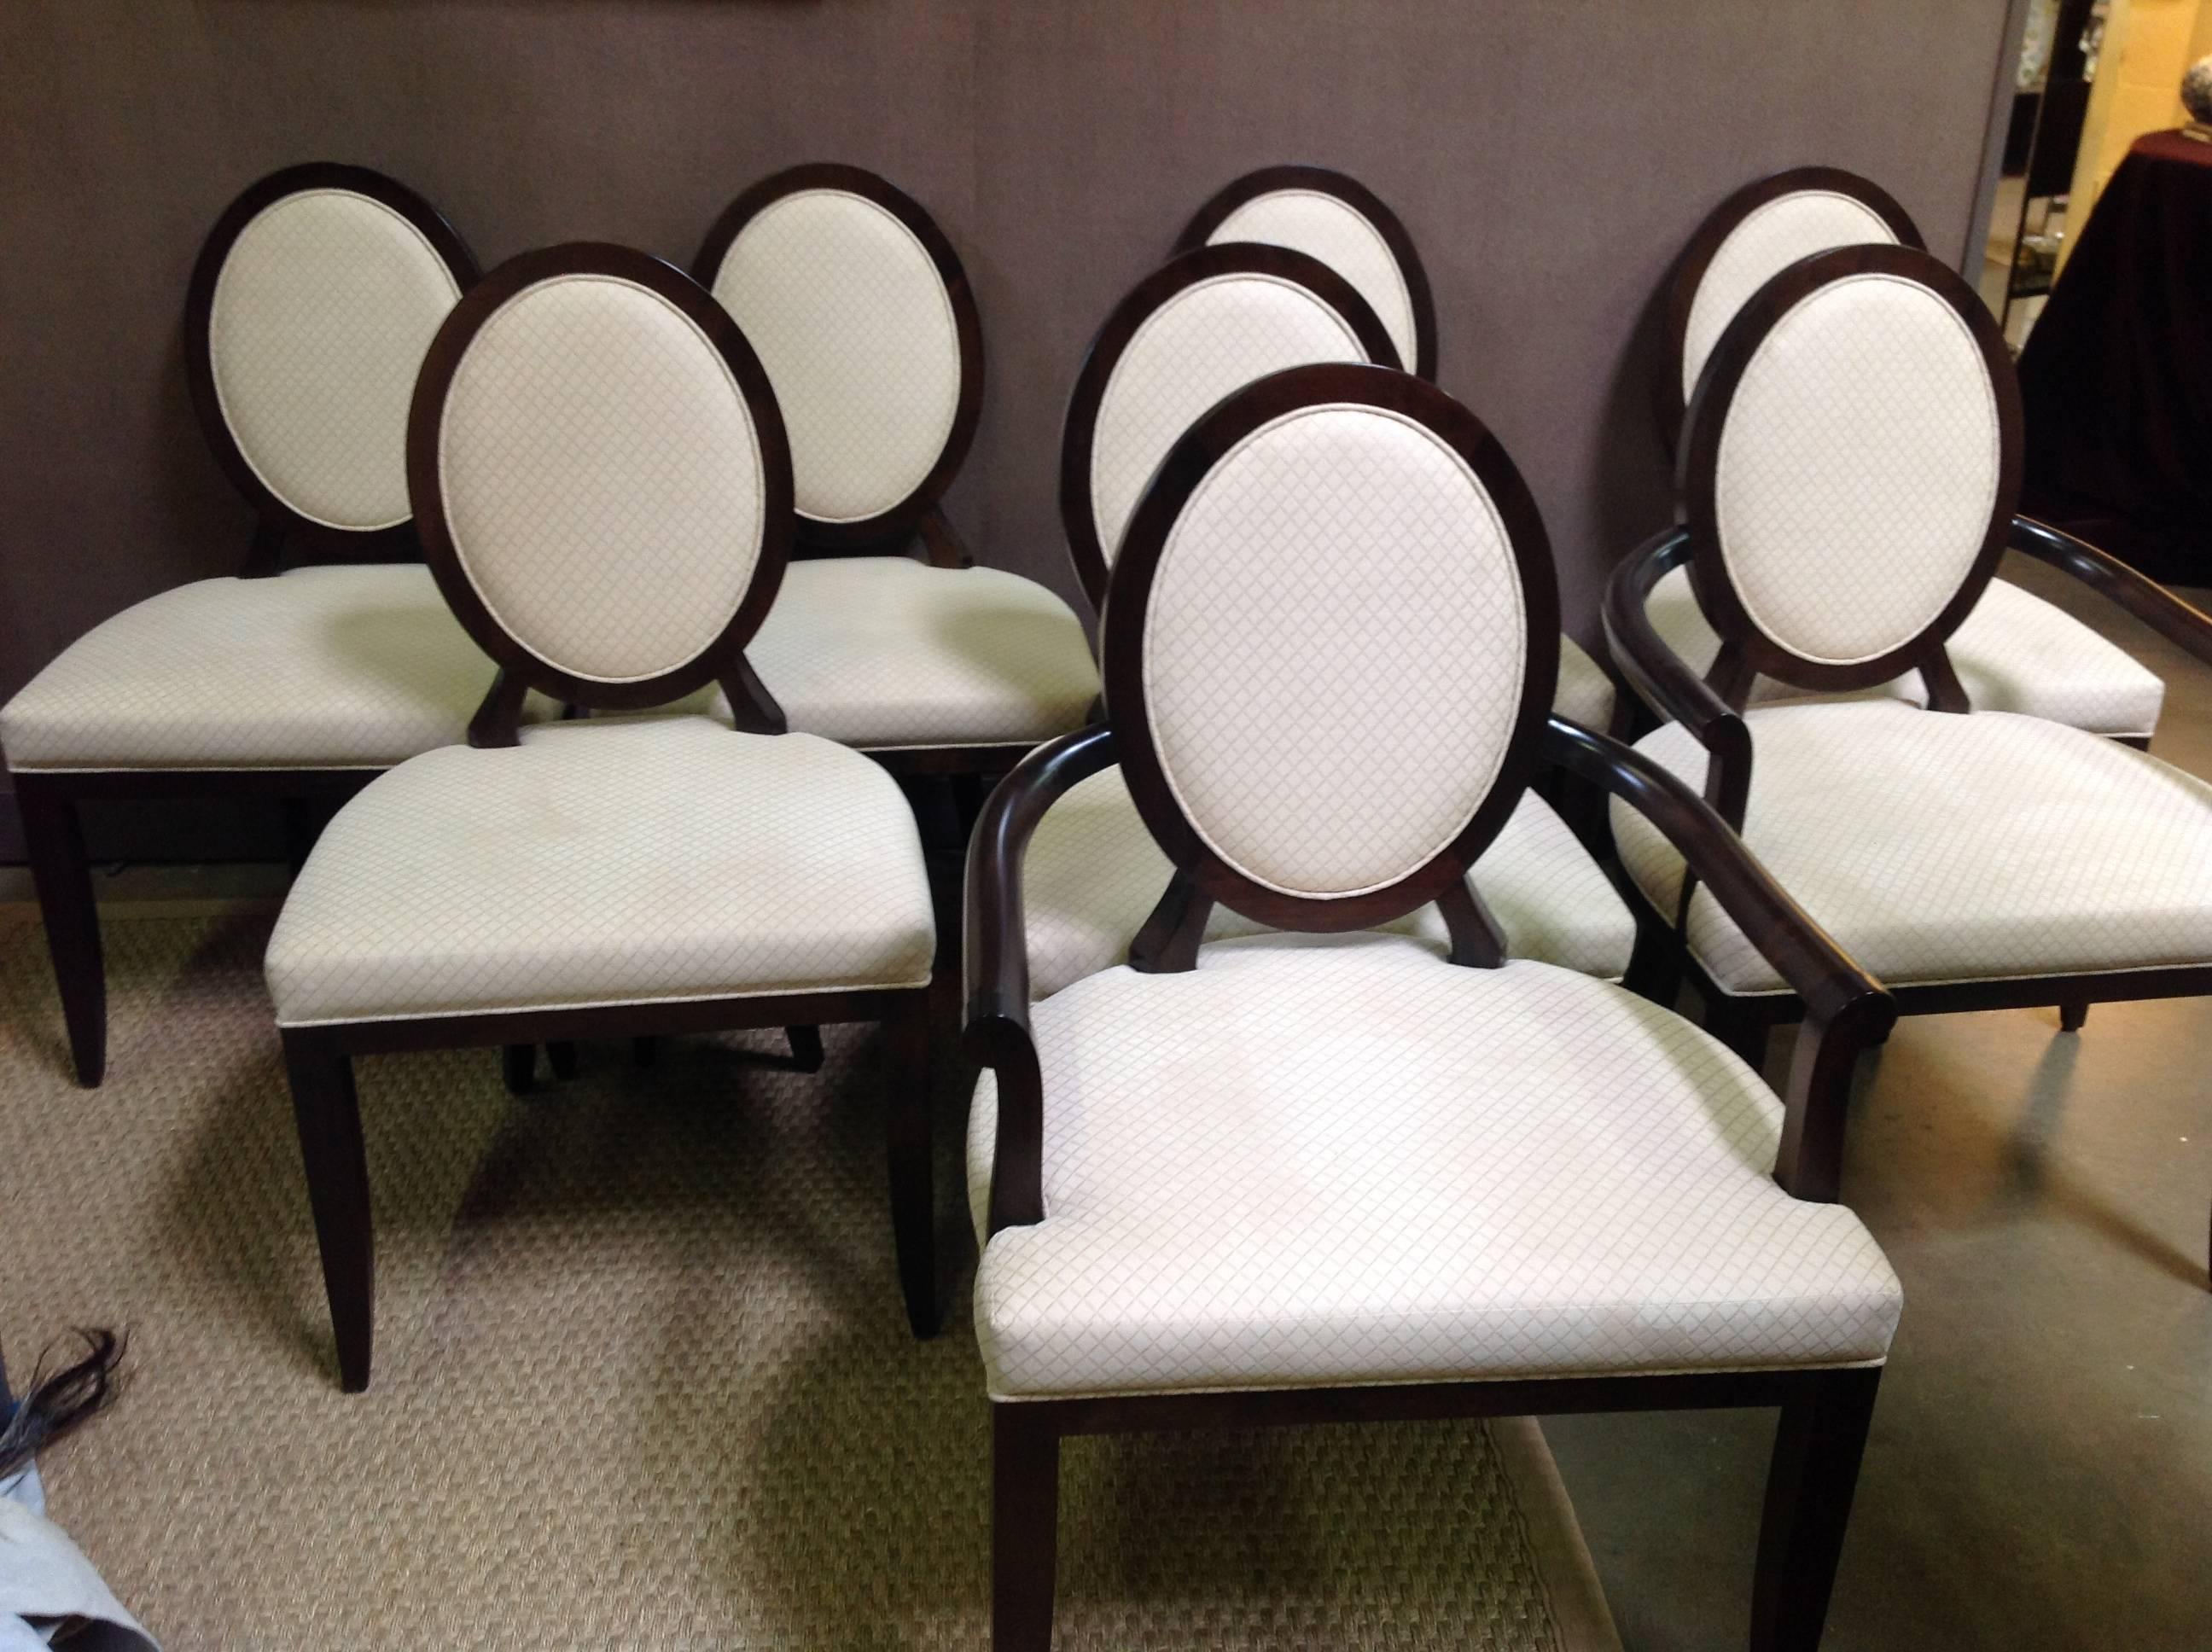 Bearing the signature Barbara Barry X -back these oval dining chairs feature a refined wood frame and inset upholstered back in java finish with x pattern cream velvet fabric. Set of eight (two arm, six side).